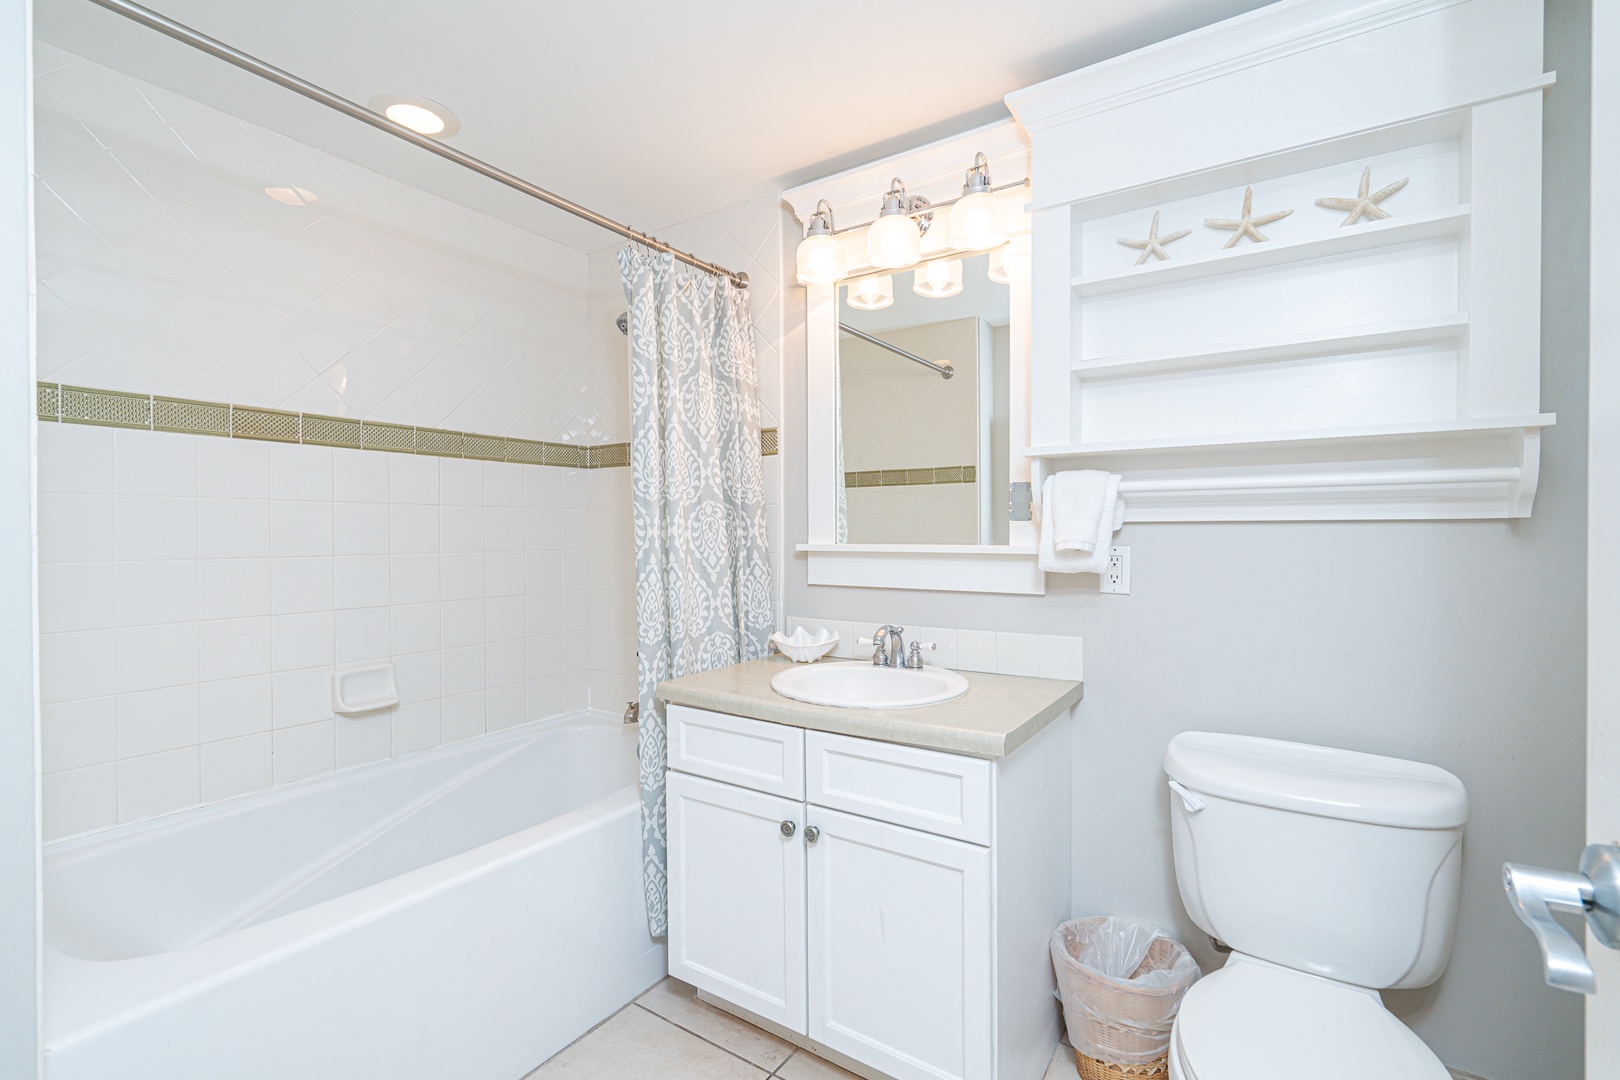 A single vanity & shower/tub combo await in the tranquil full bath